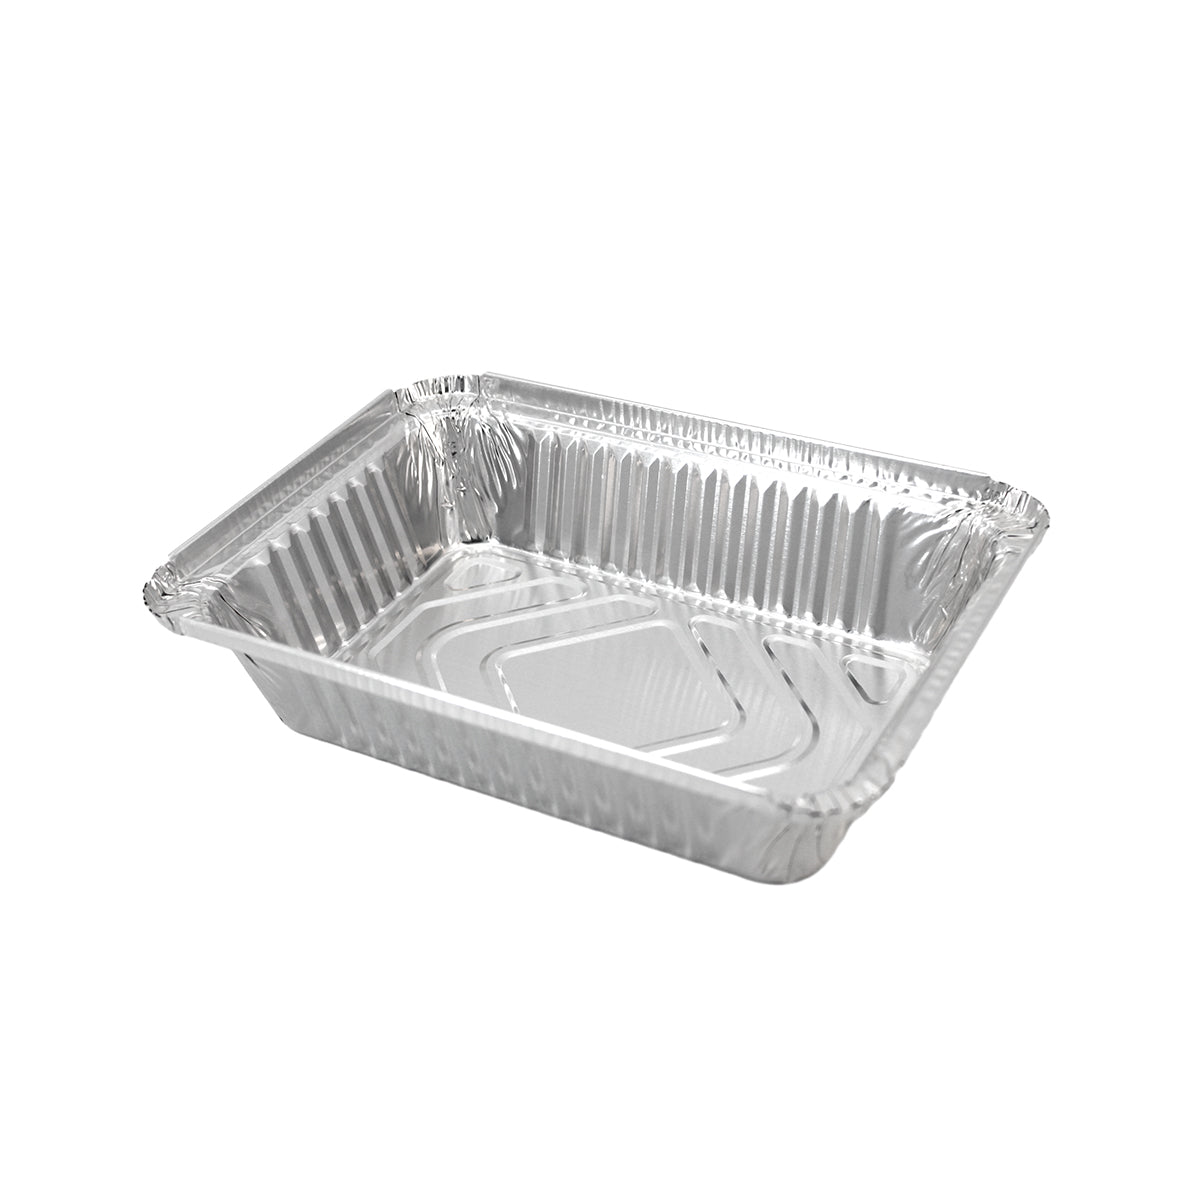 2.25 LB Oblong Takeout Pan | Recyclable Aluminum